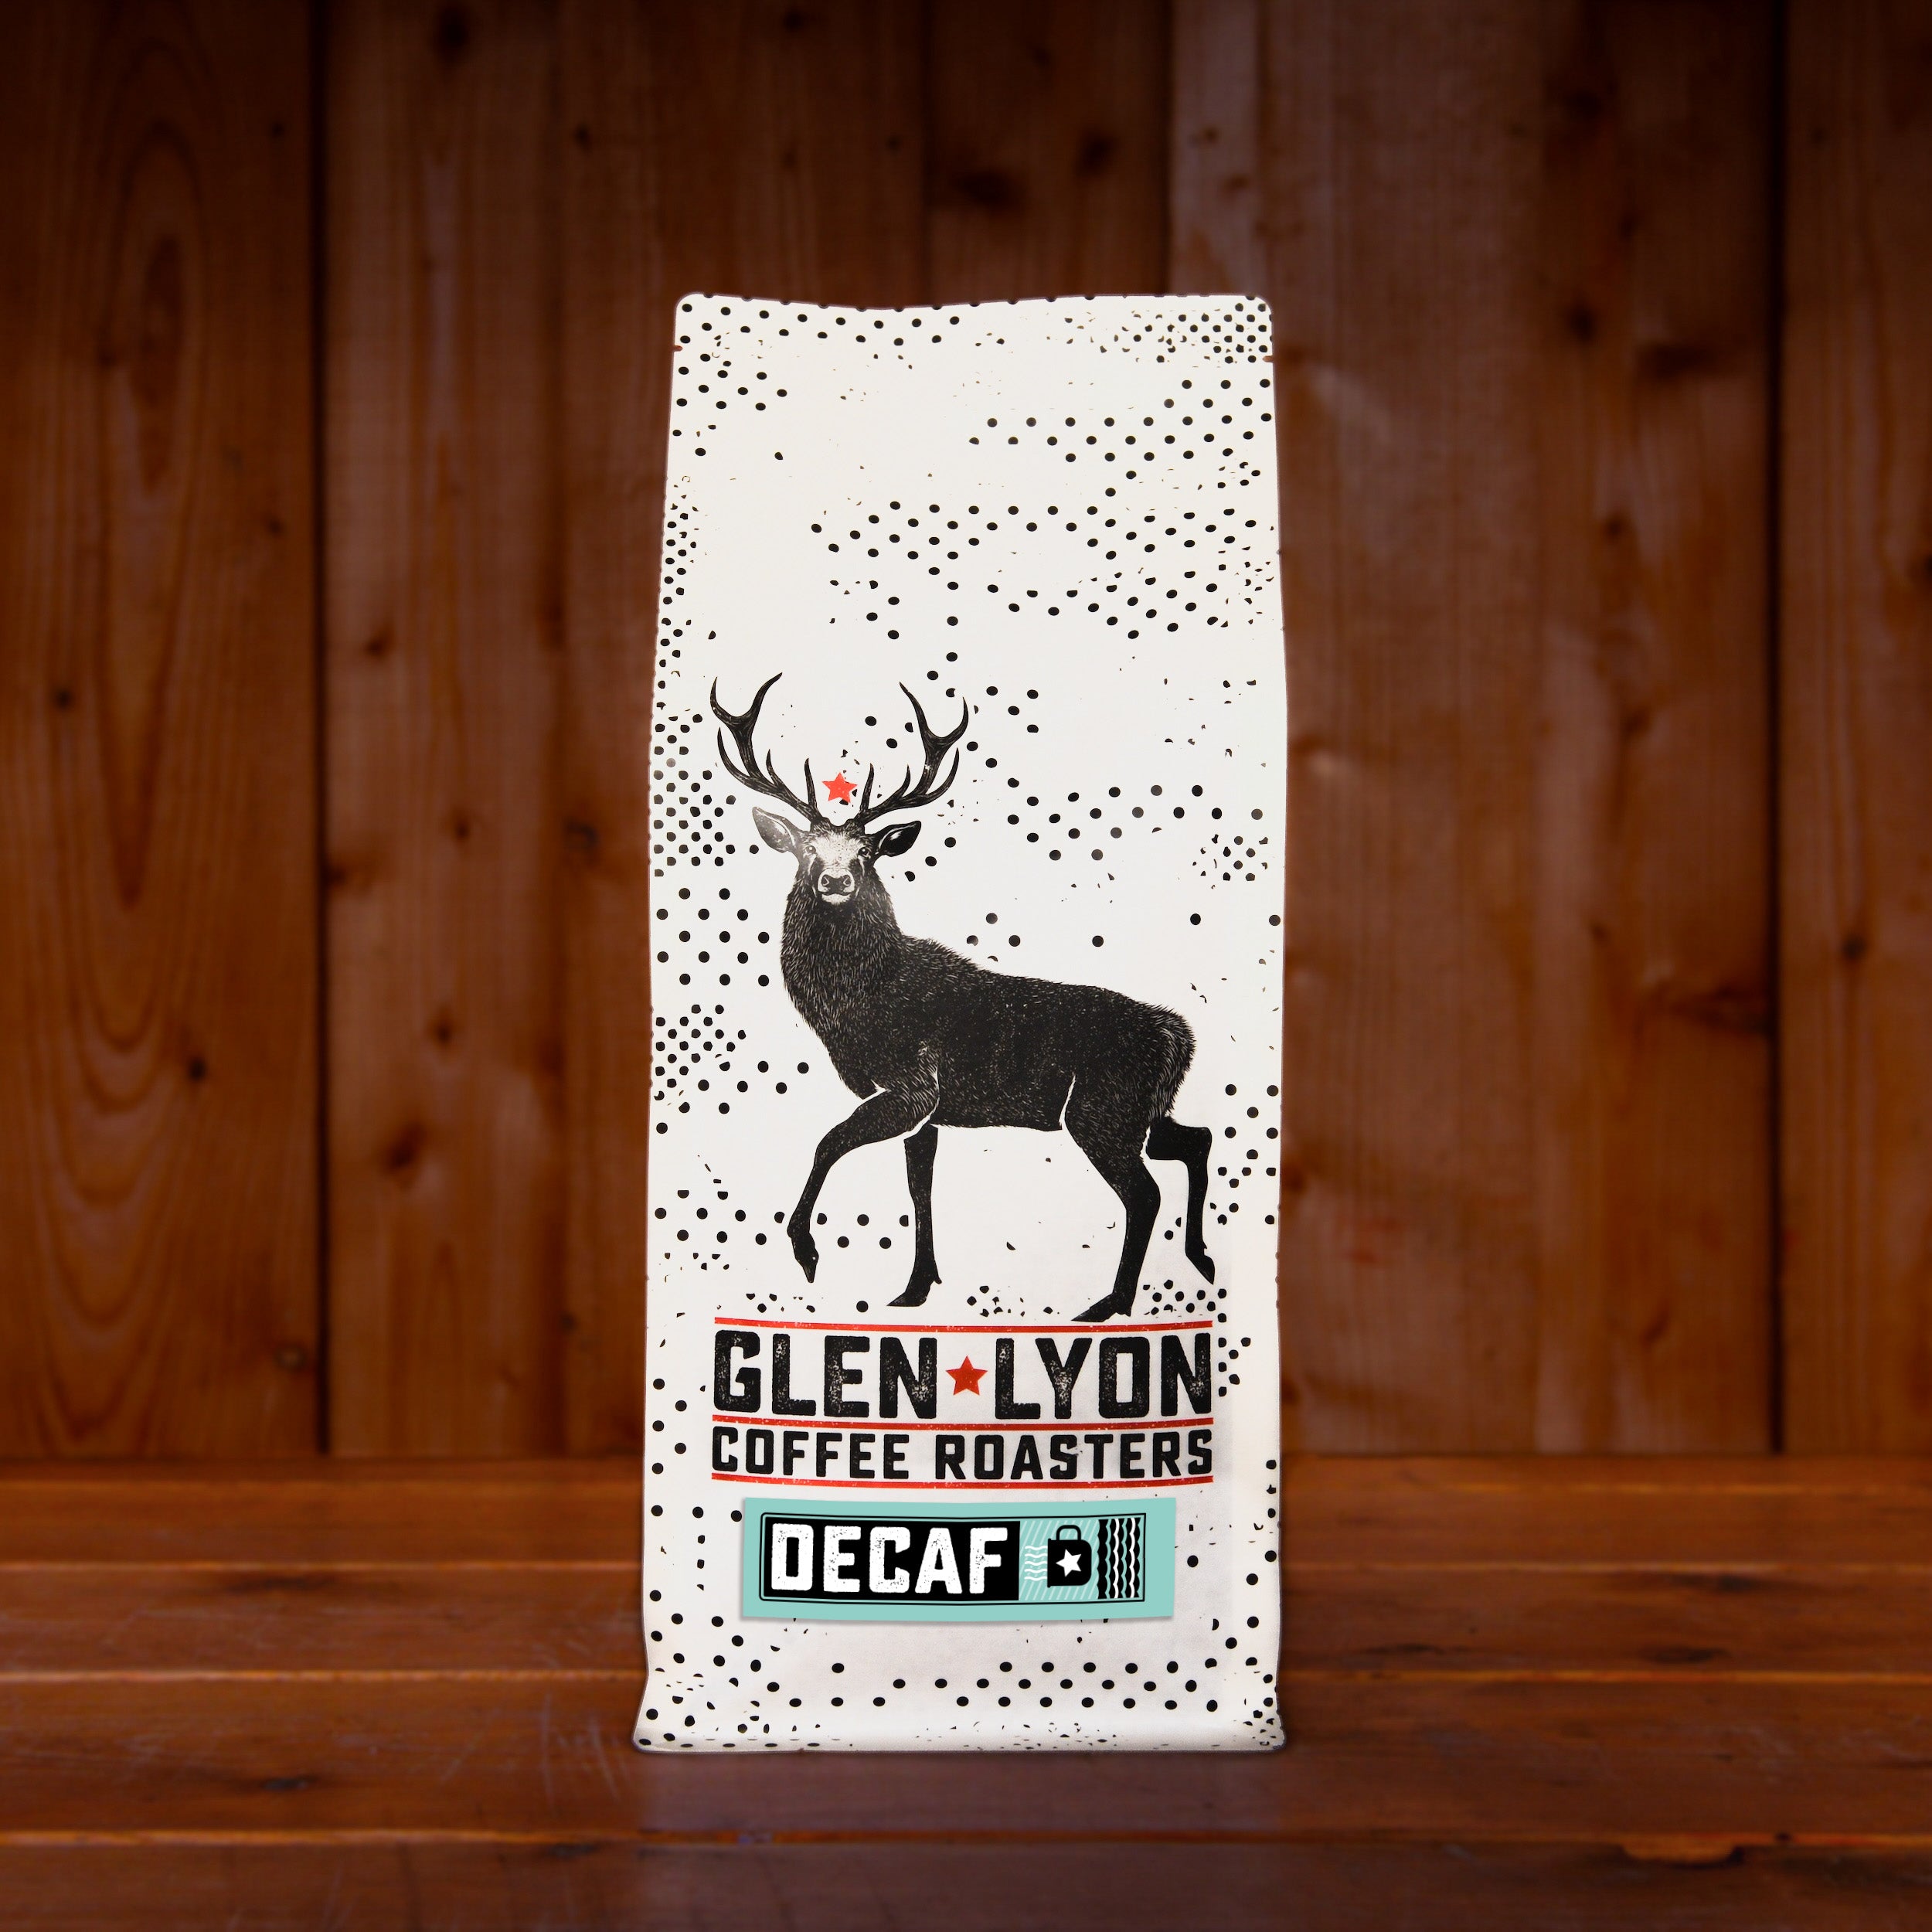 A 1kg bag of Glen Lyon Coffee Roasters' Decaf speciality coffee sitting on a wooden table